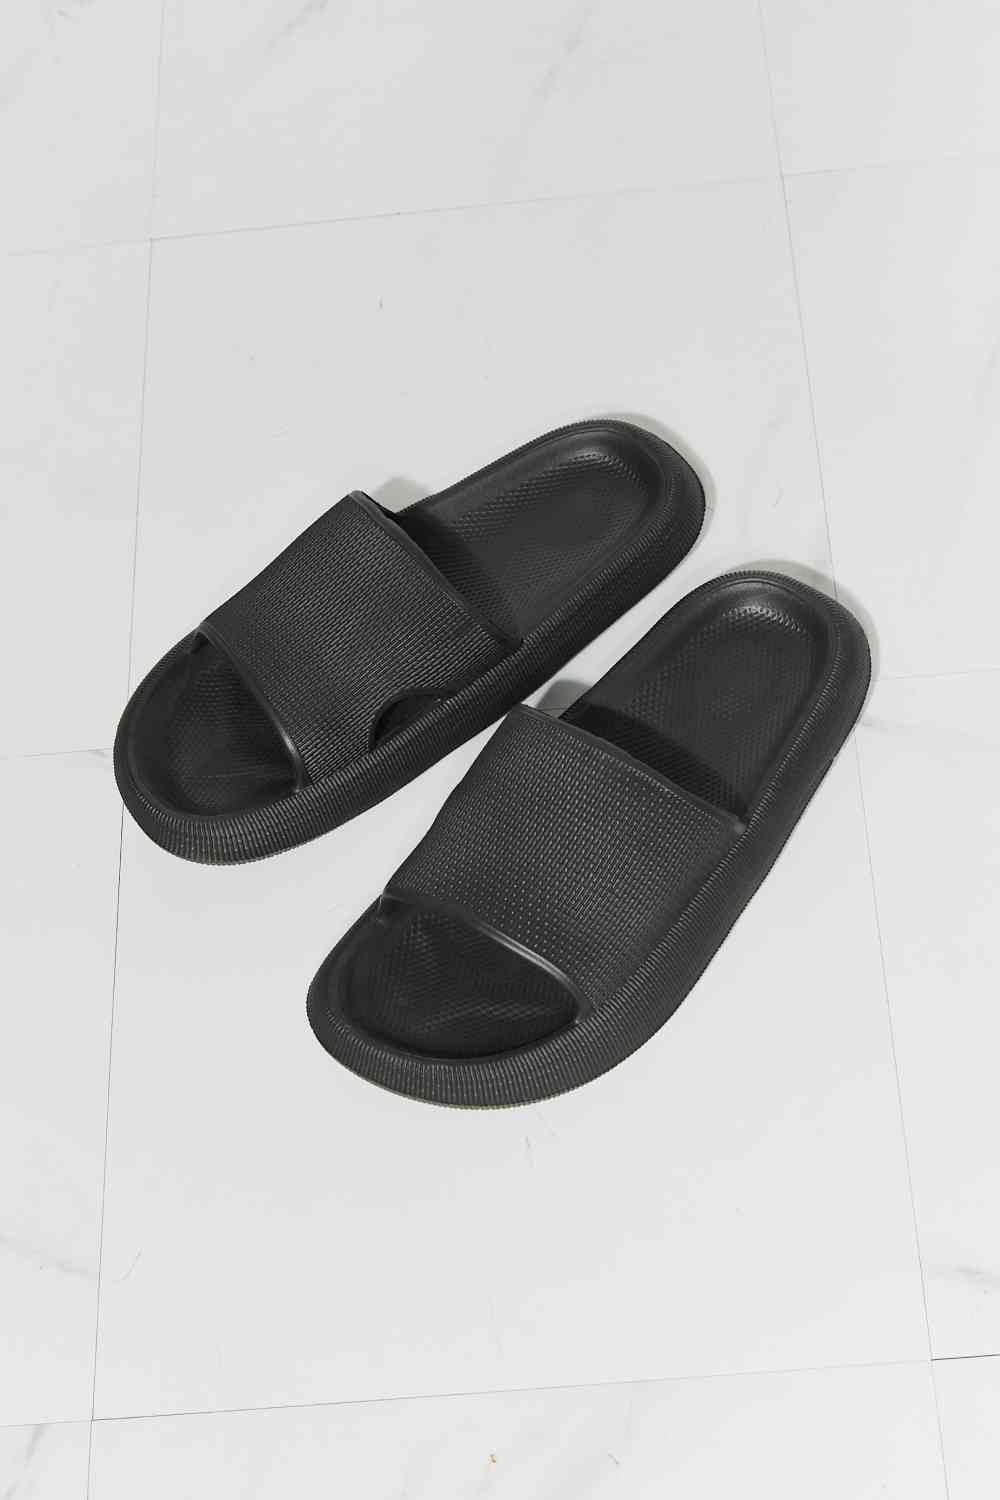 Arms Around Me Open Toe Slide in Black - Accessories - Shoes - 5 - 2024